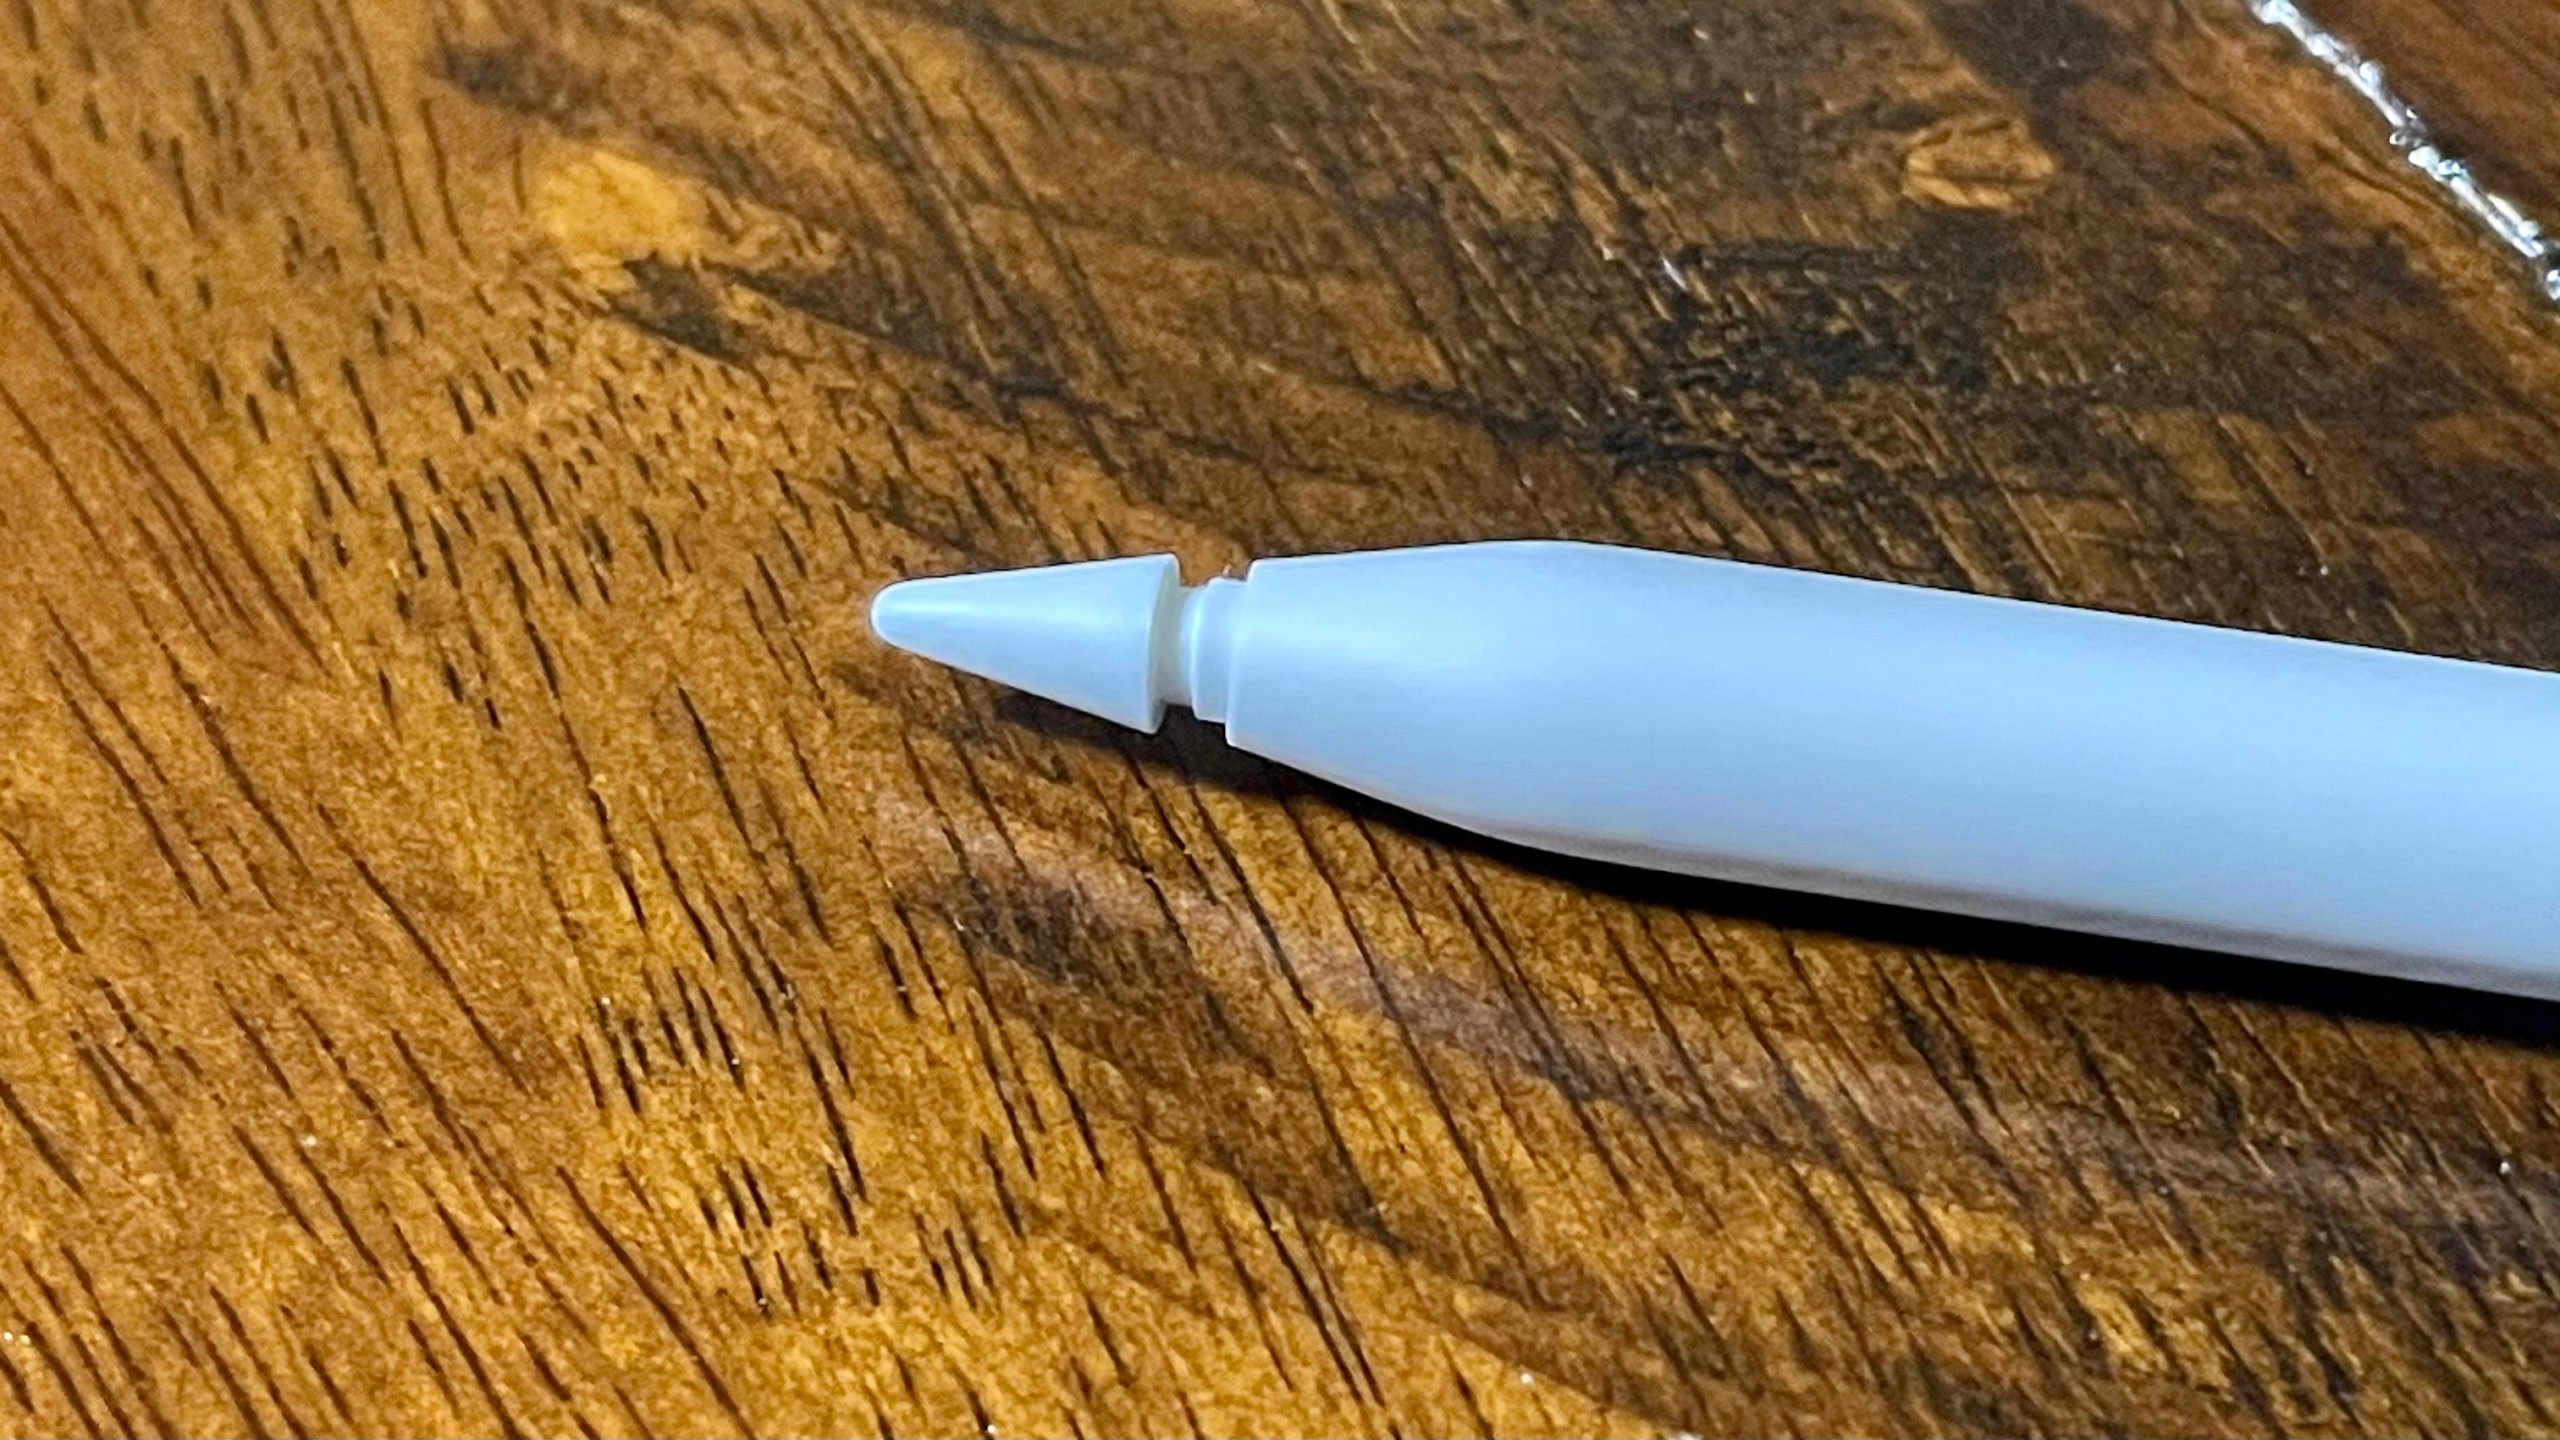 Apple Pencil tip coming off